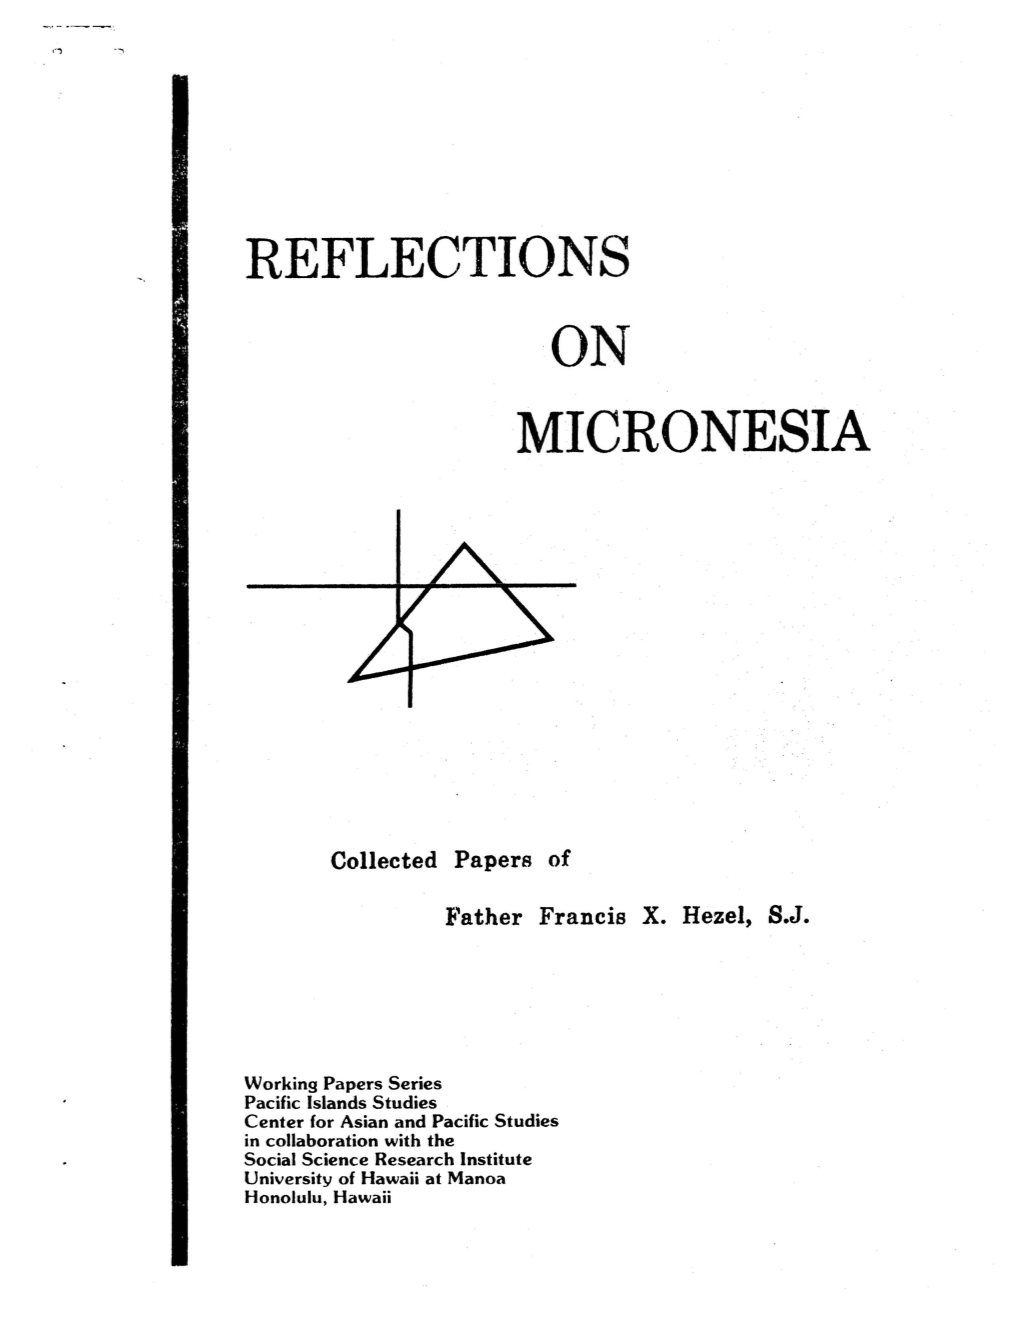 Reflections on Micronesia